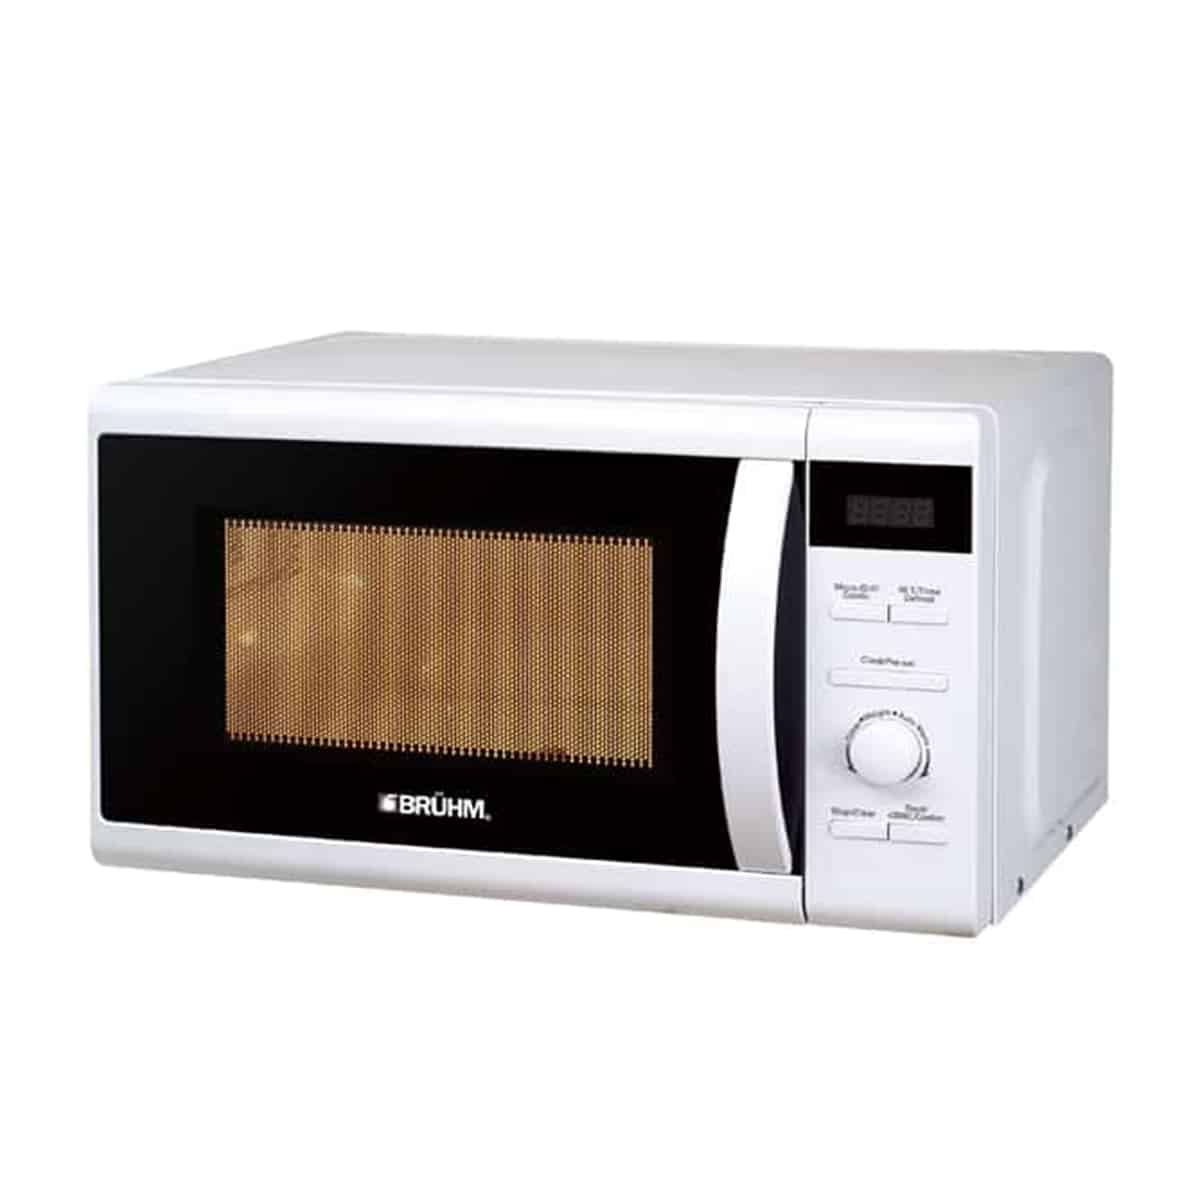 Bruhm Microwave Oven